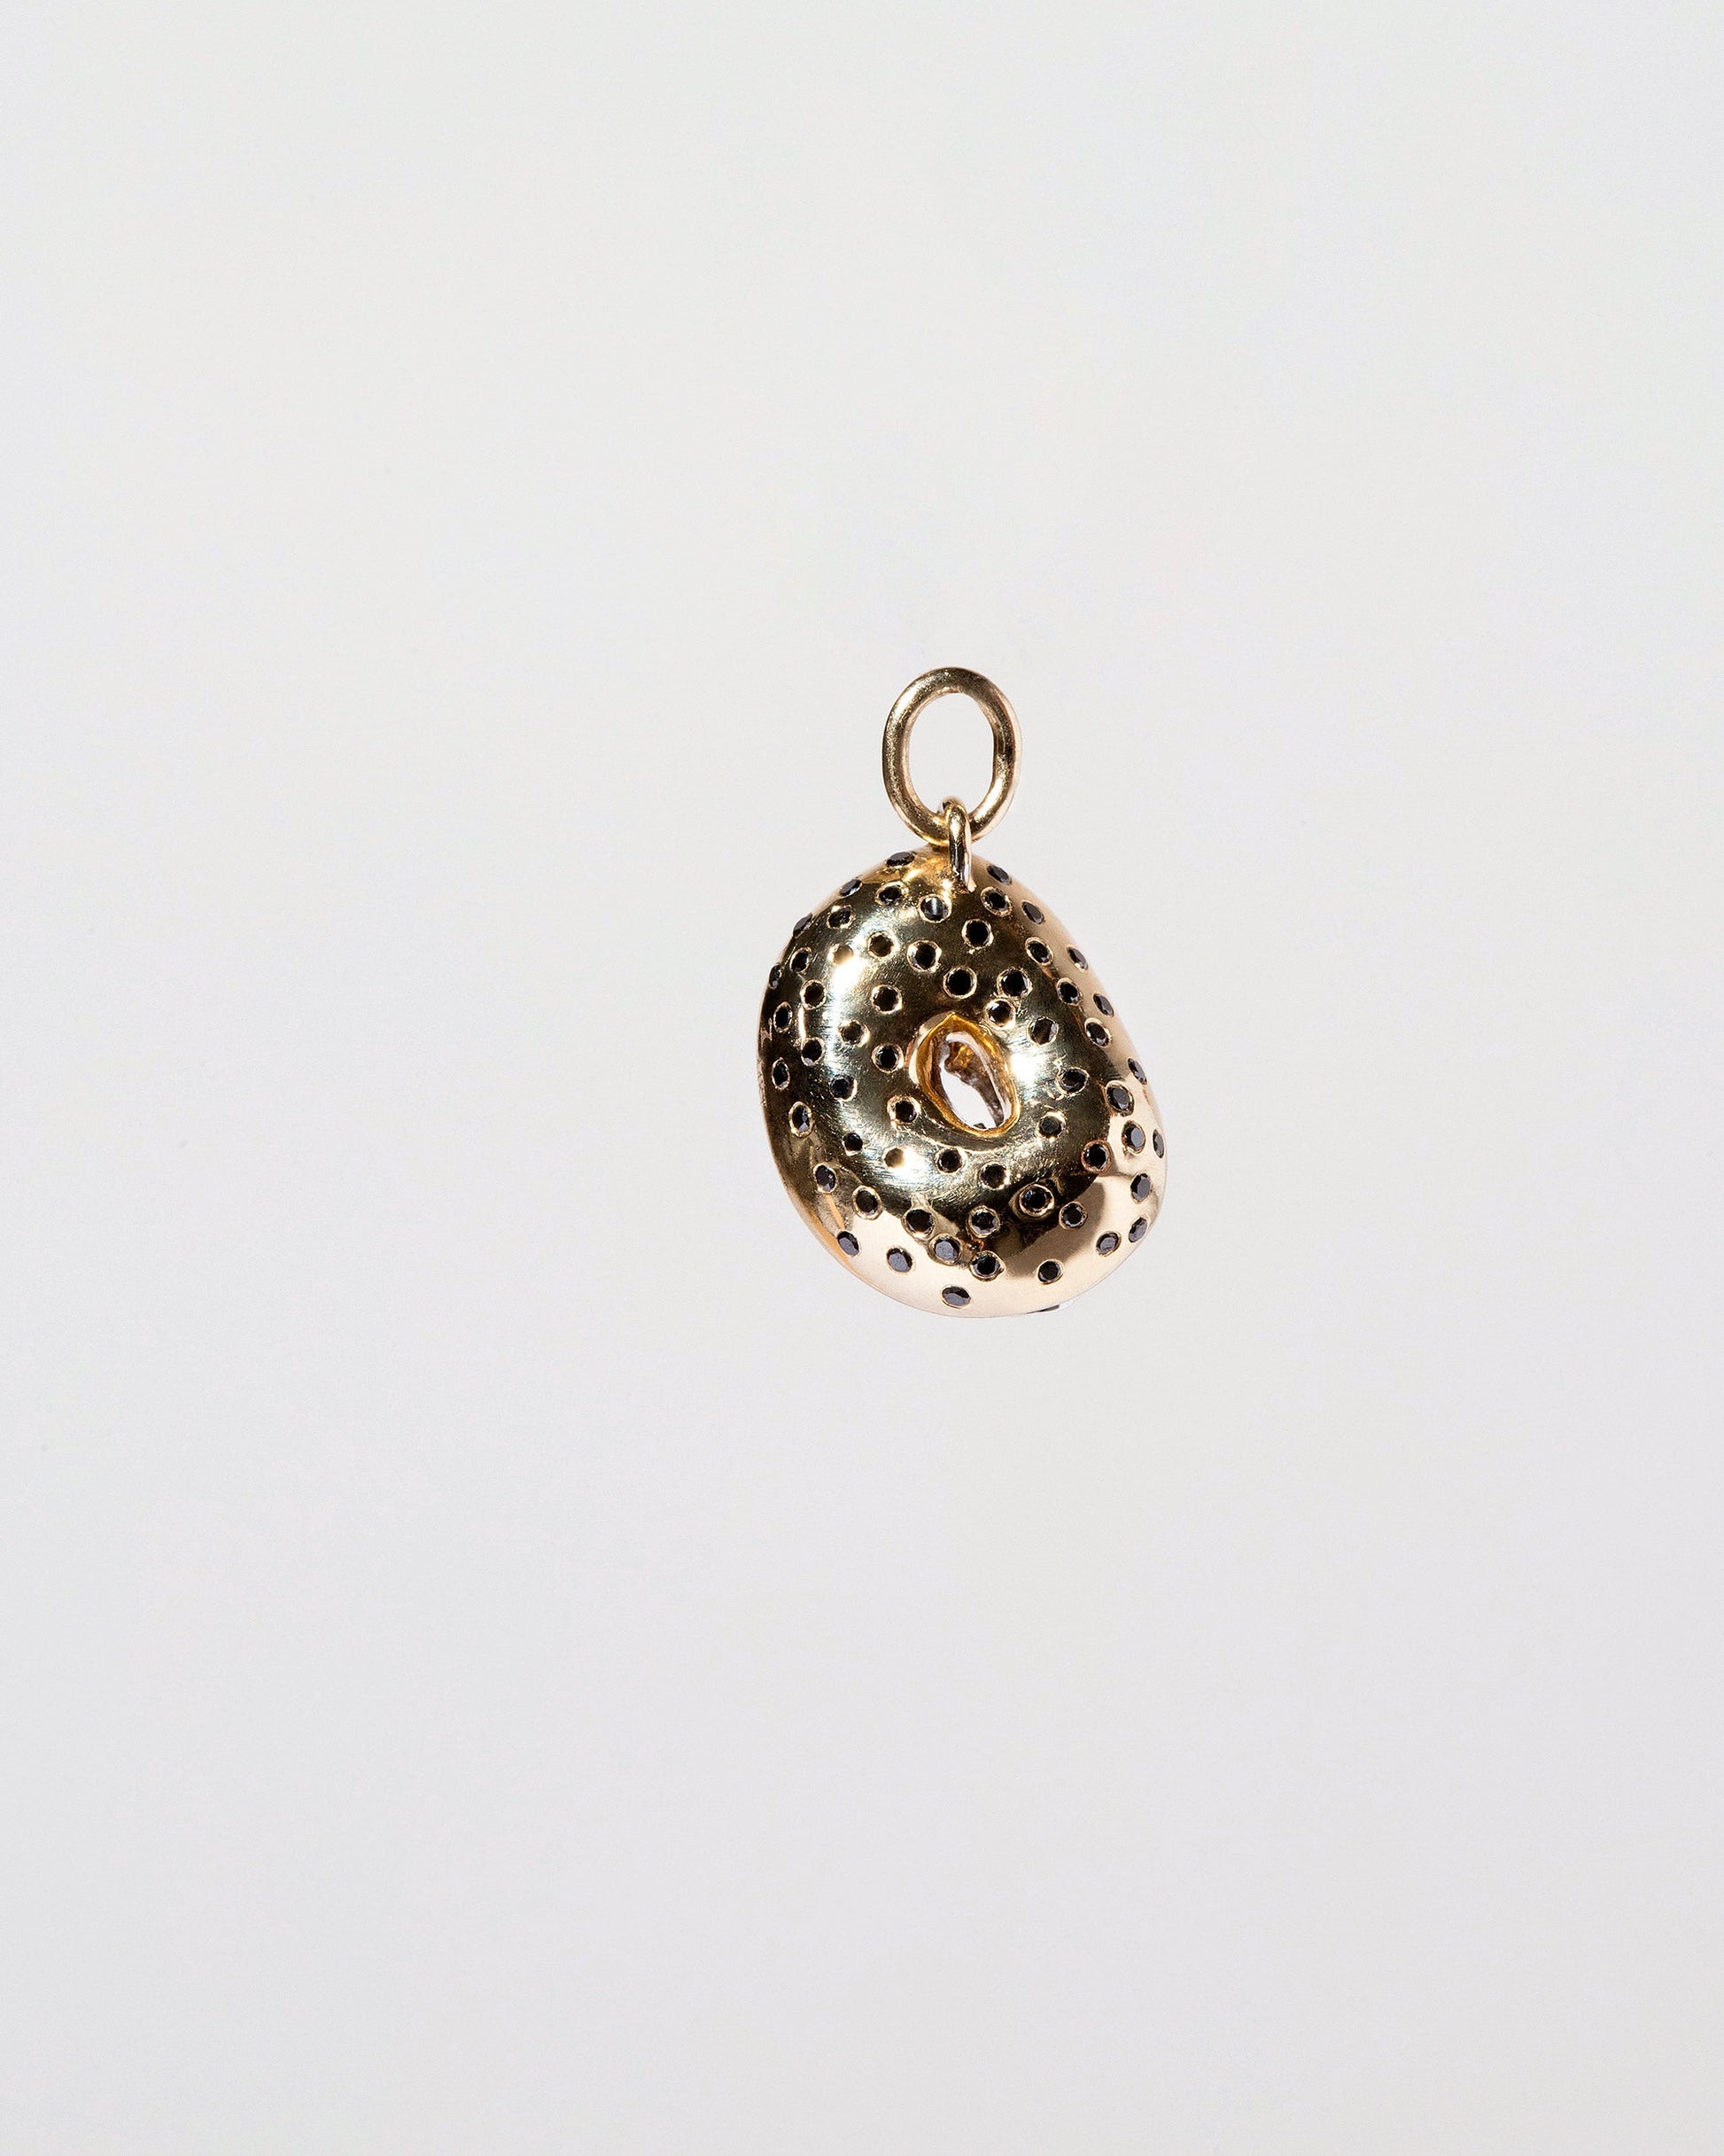  Poppy Seed Bagel Charm with Cream Cheese on light color background.